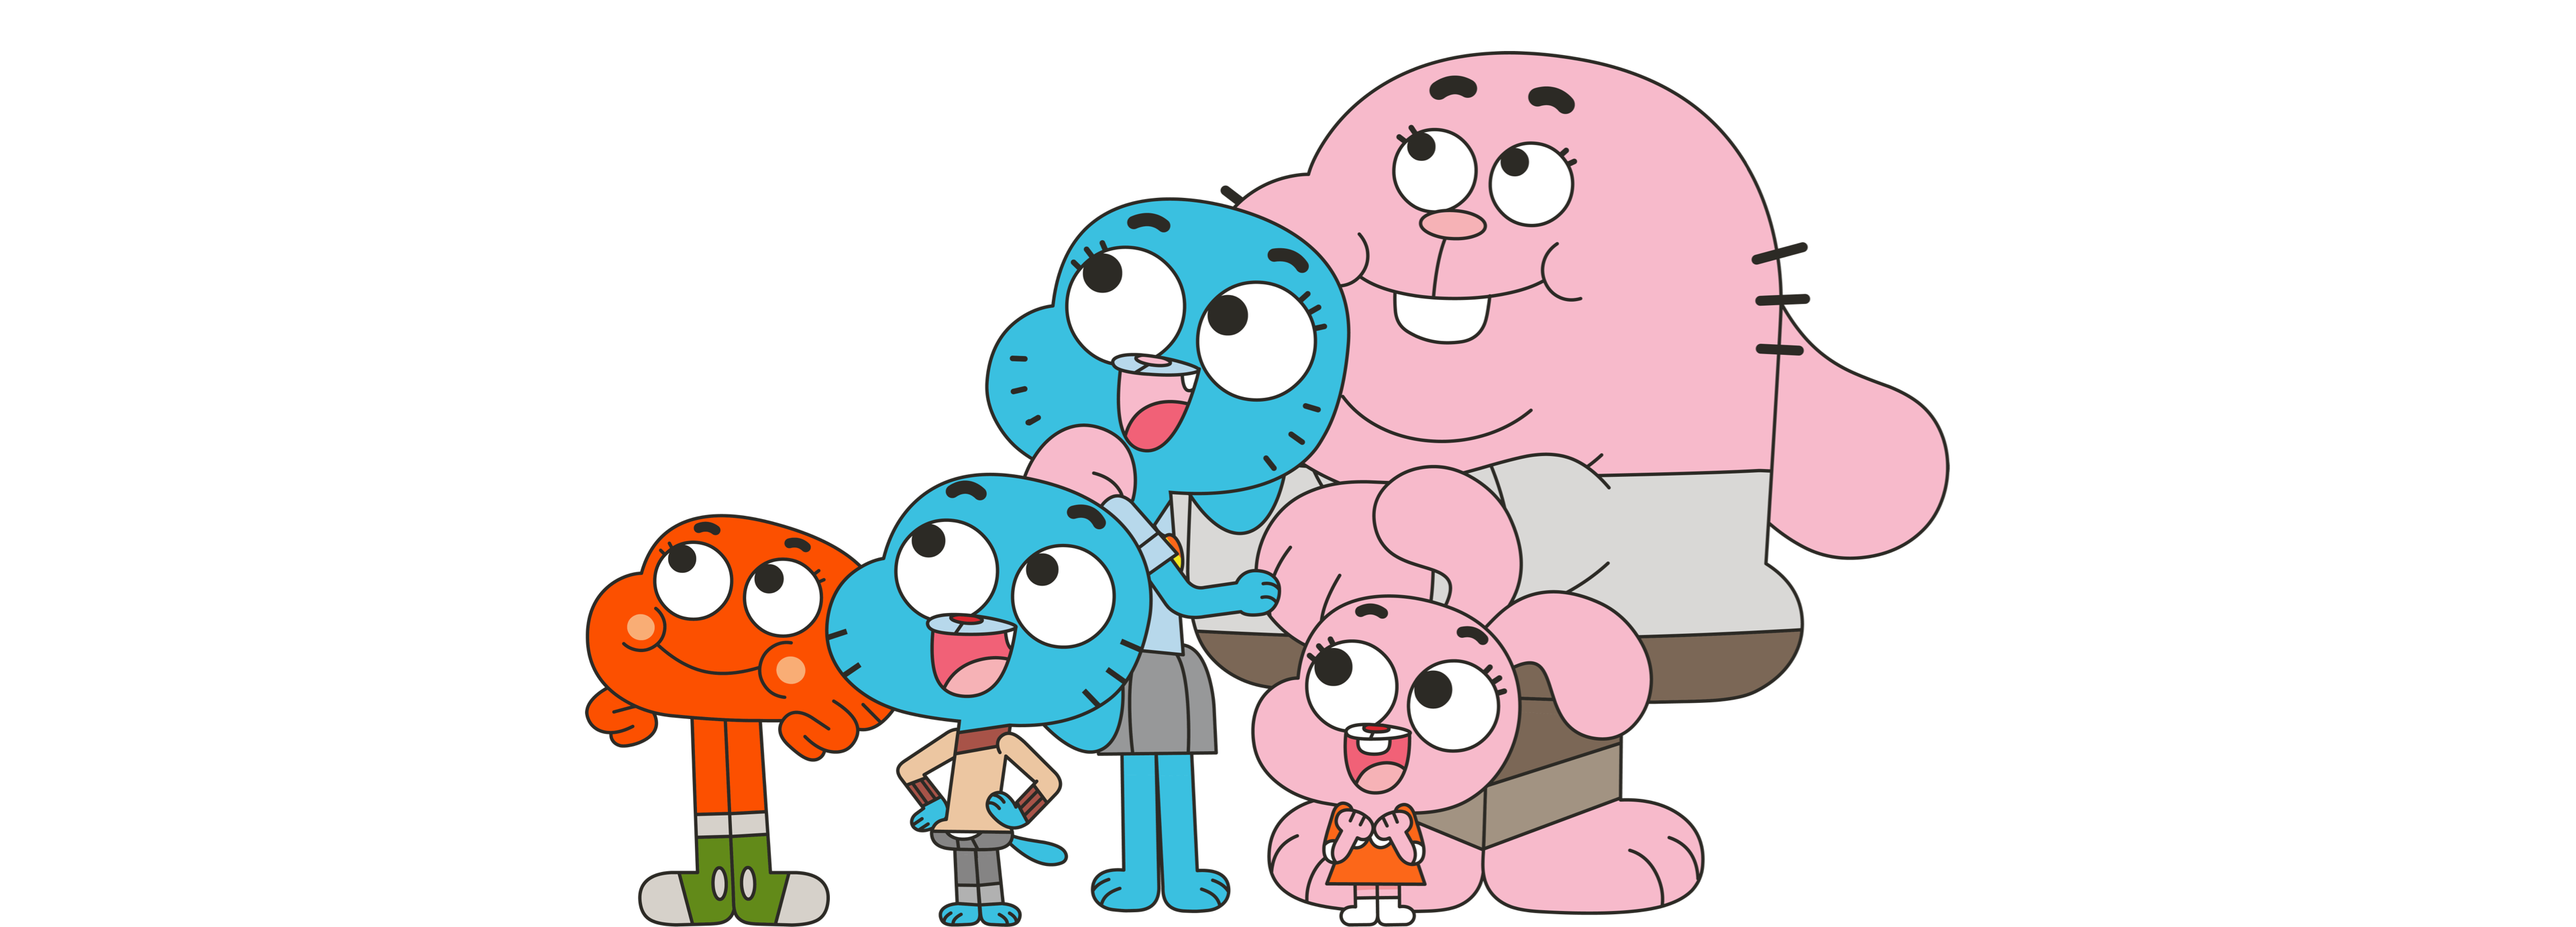 Gumball online free